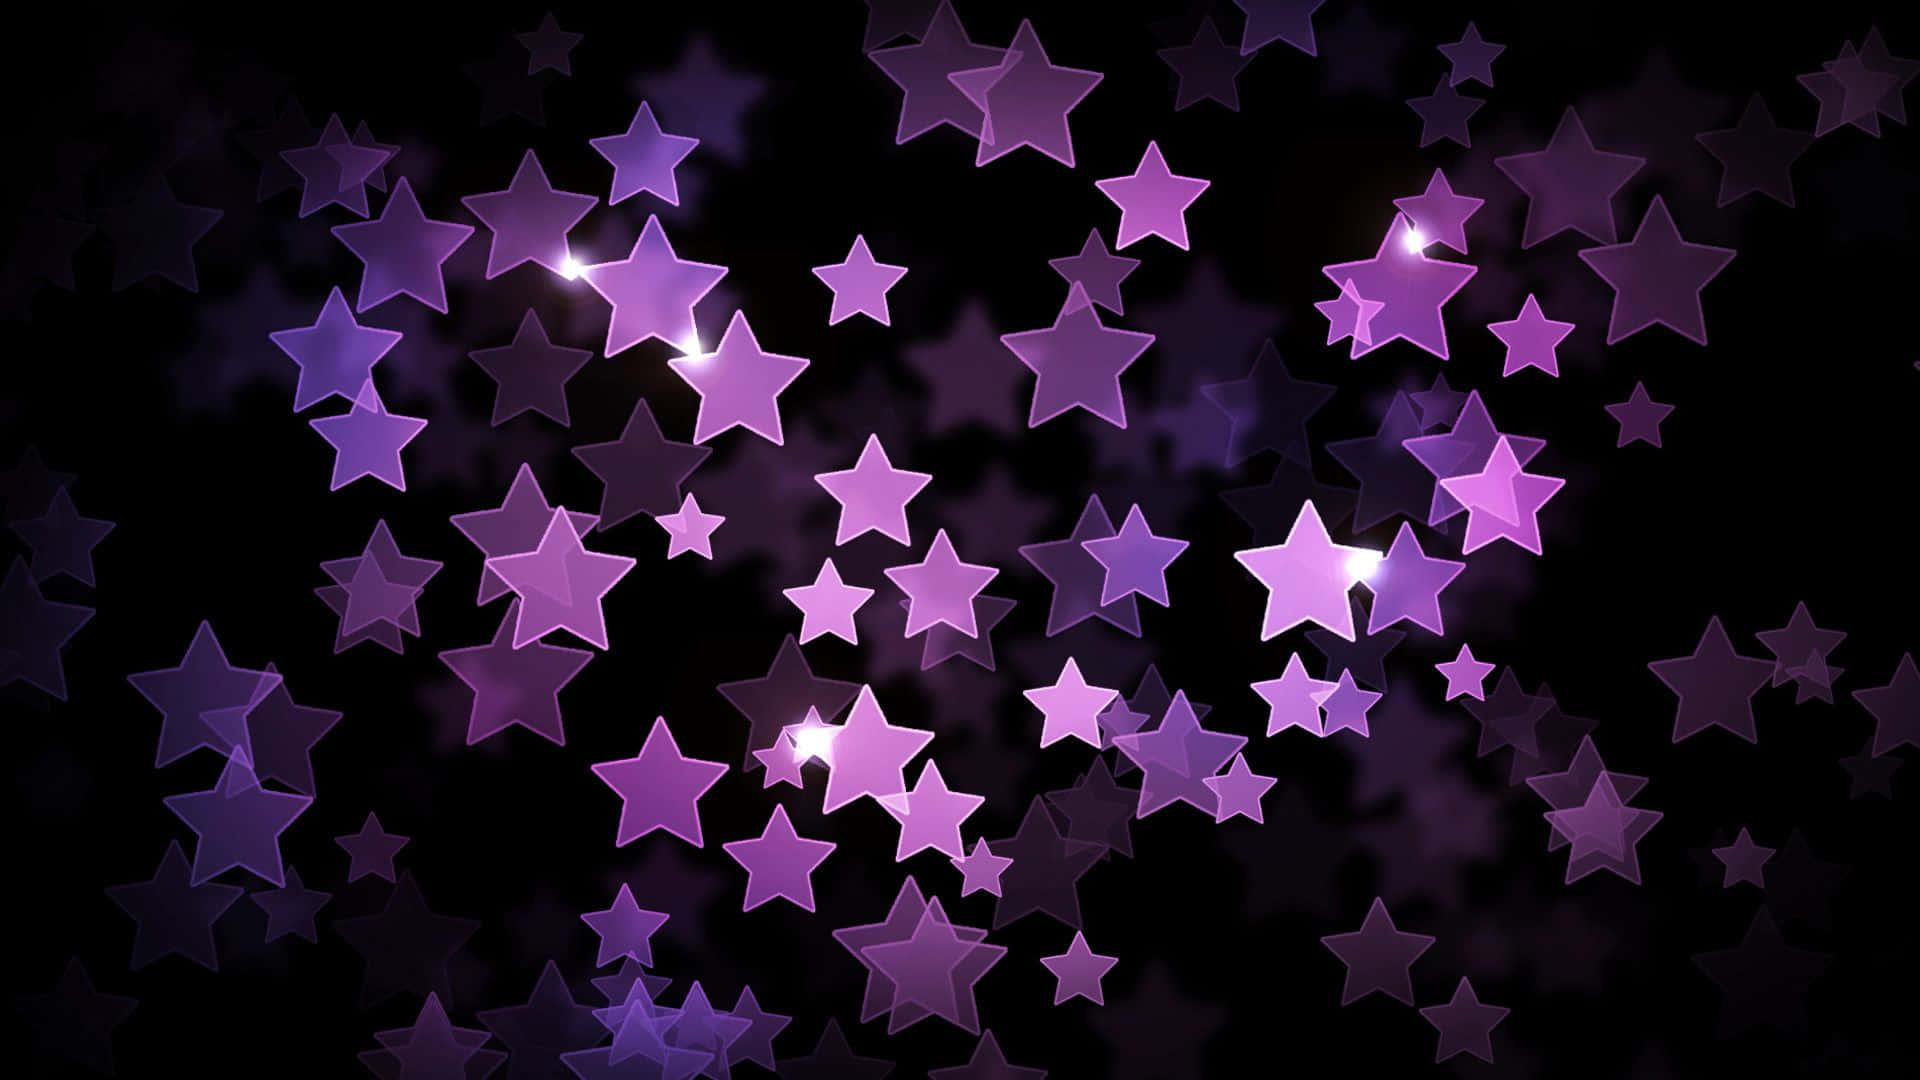 Shine Brighter Than The Stars With Aesthetic Star!